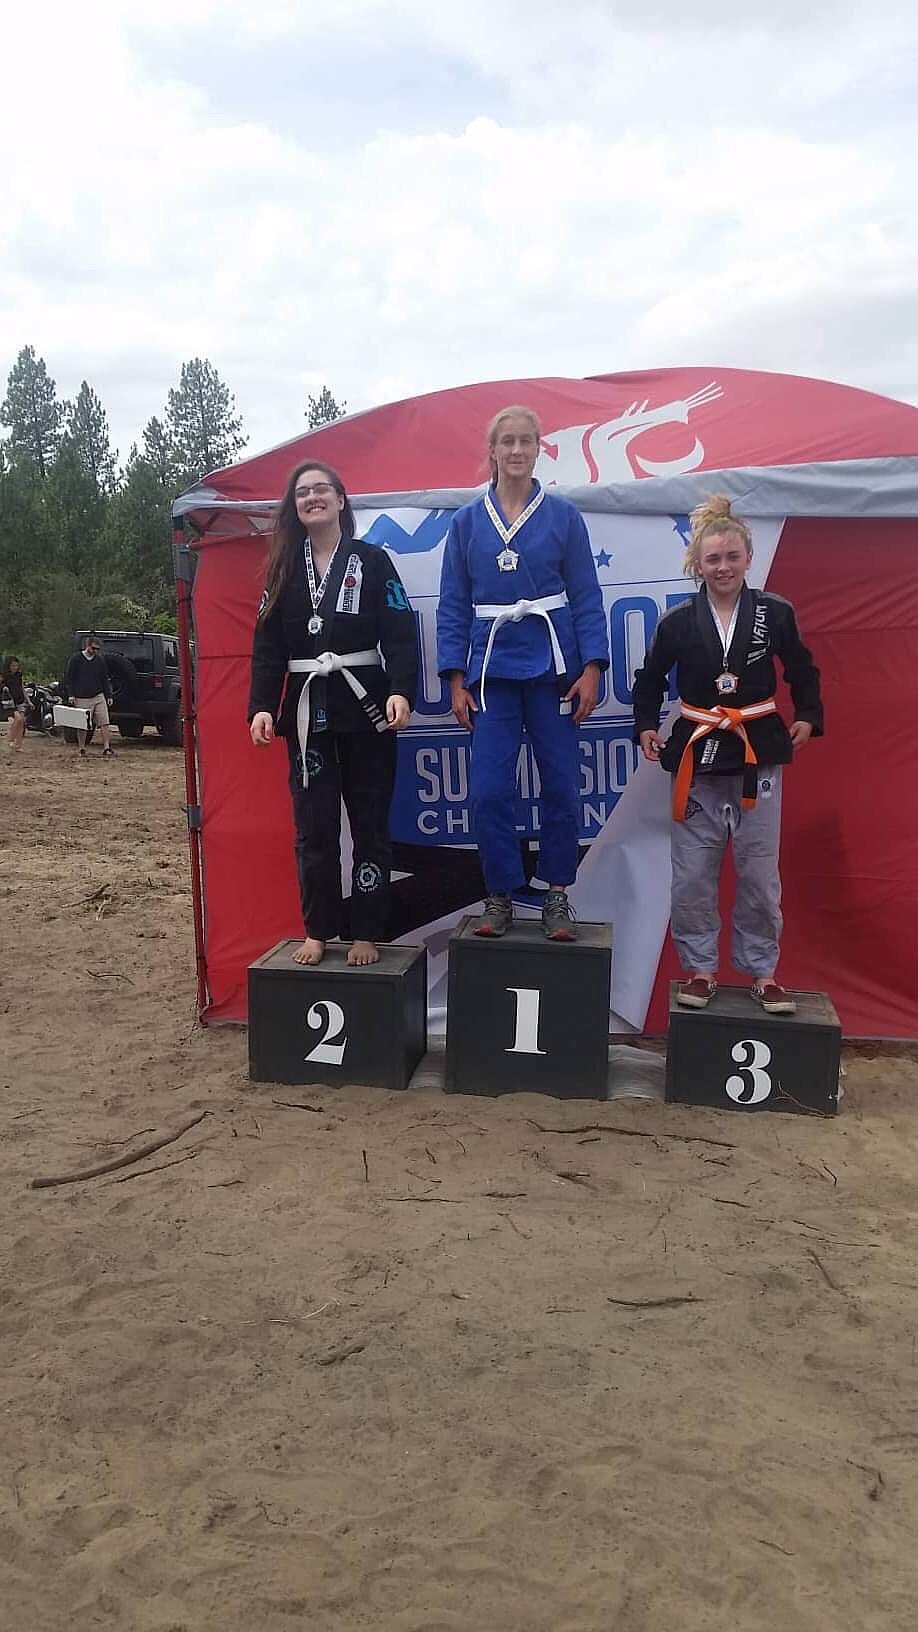 Above: Shahanna Bushnell posing on the podium.

Left: Shahannah Bushnell attended a Jui-Jitsu competition and won second place.
Courtesy photos